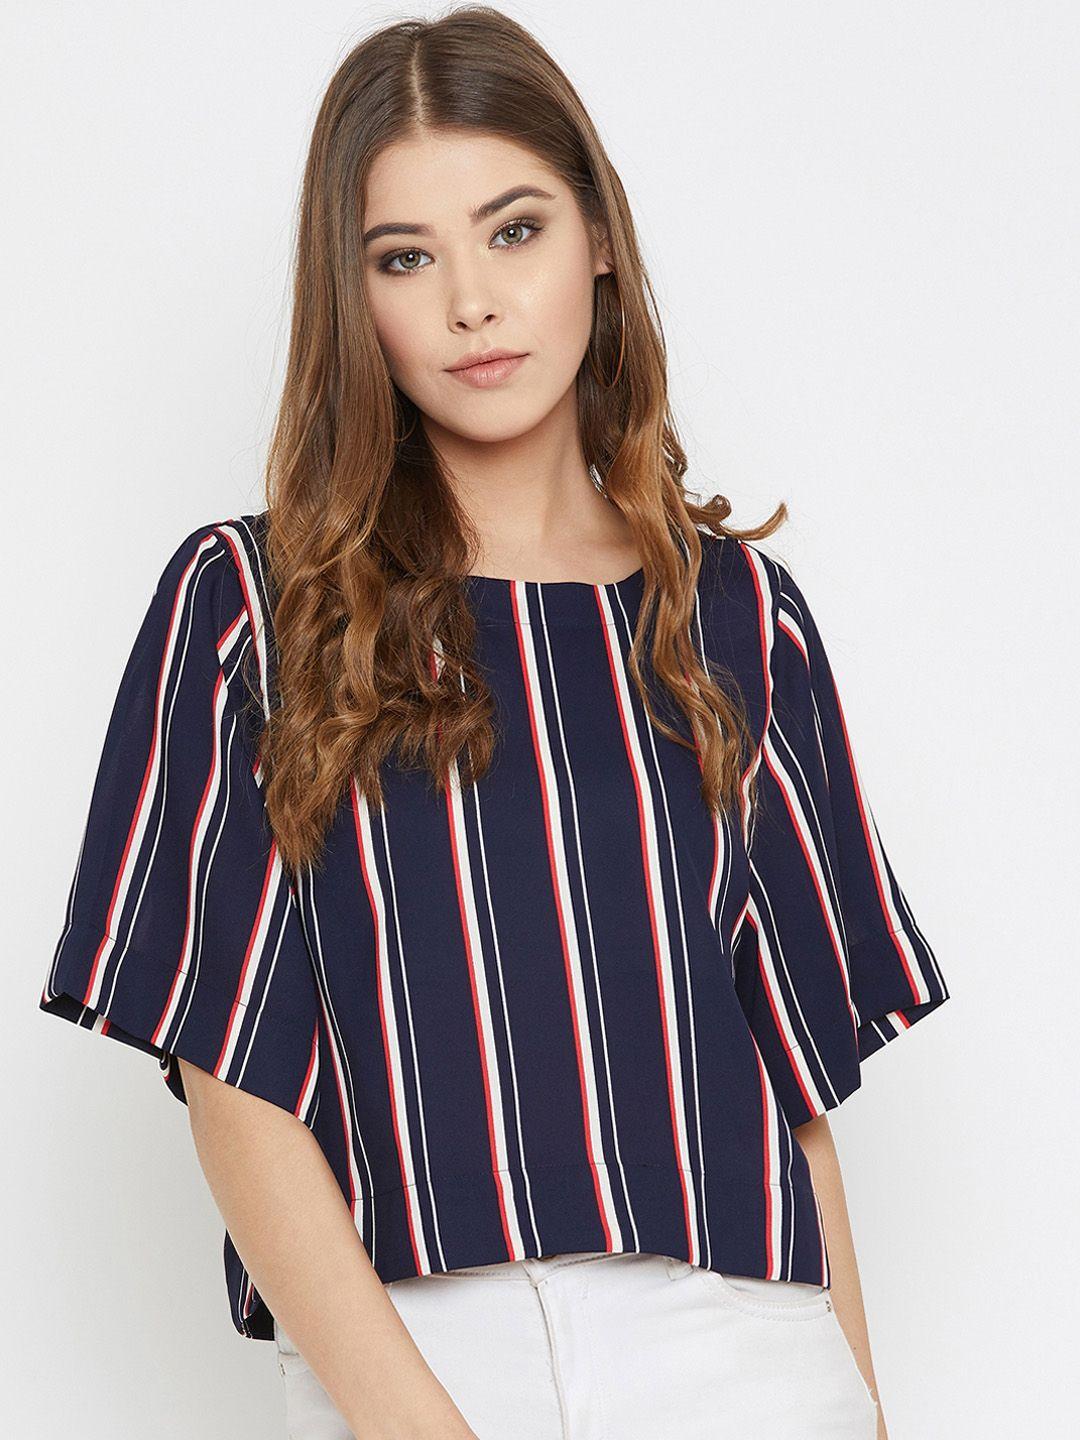 ruhaans women navy blue & white striped boxy top